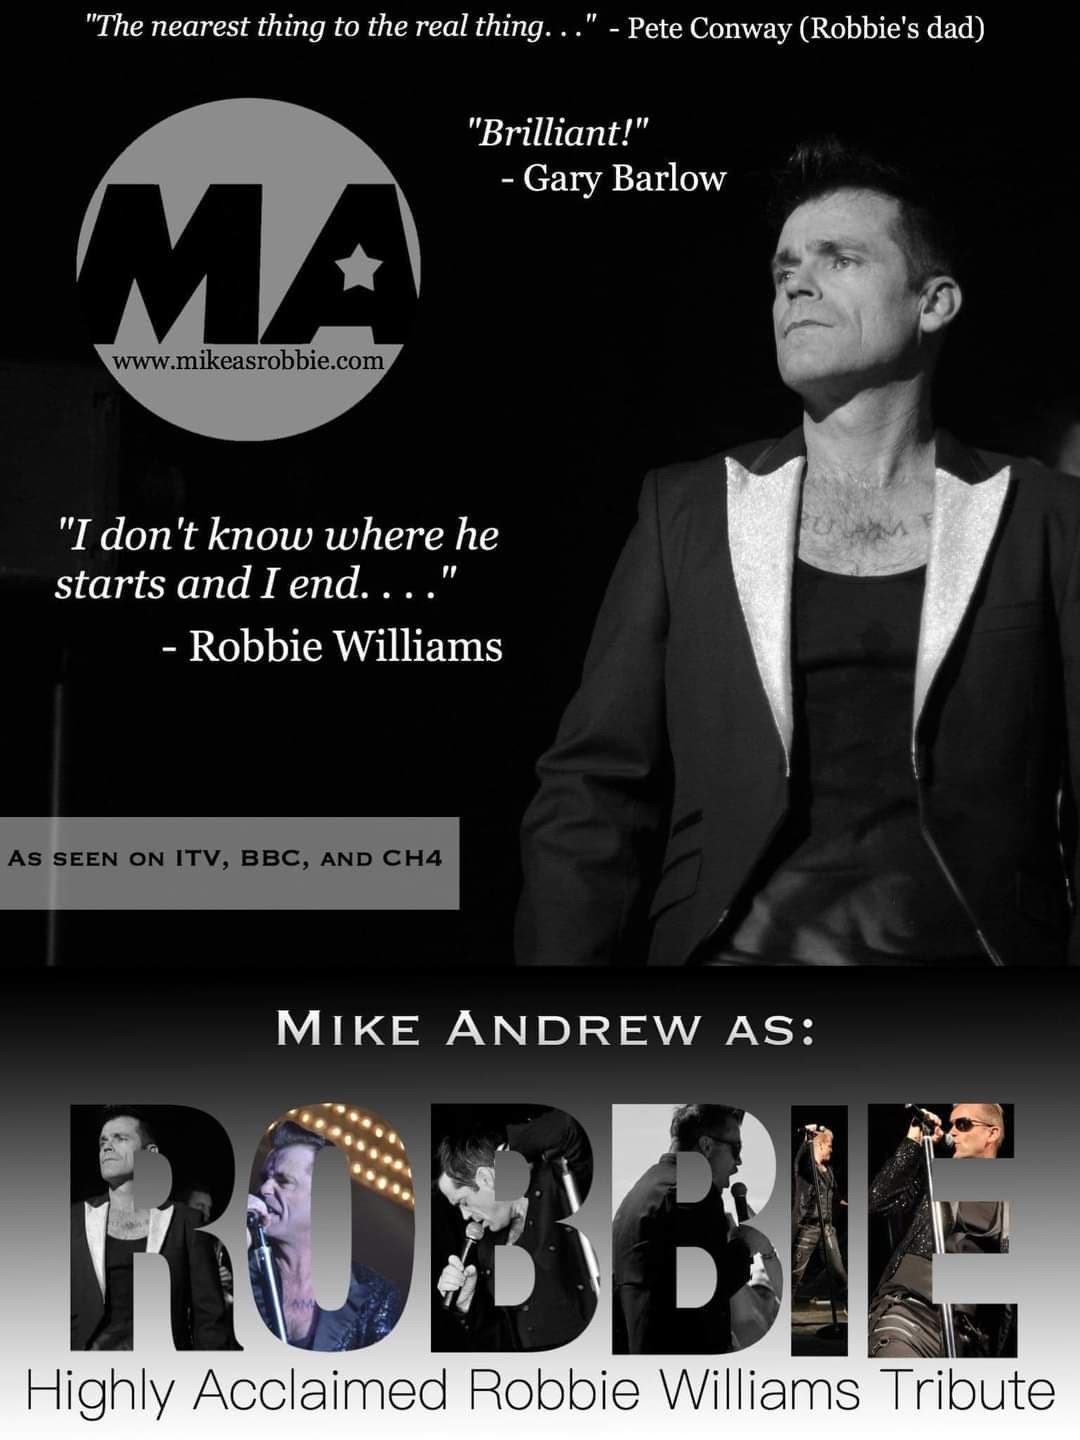 ROBBIE WILLIAMS TRIBUTE NIGHT  on nov. 05, 19:30@Wisbech working mens con club - Buy tickets and Get information on whittlesey music nights 